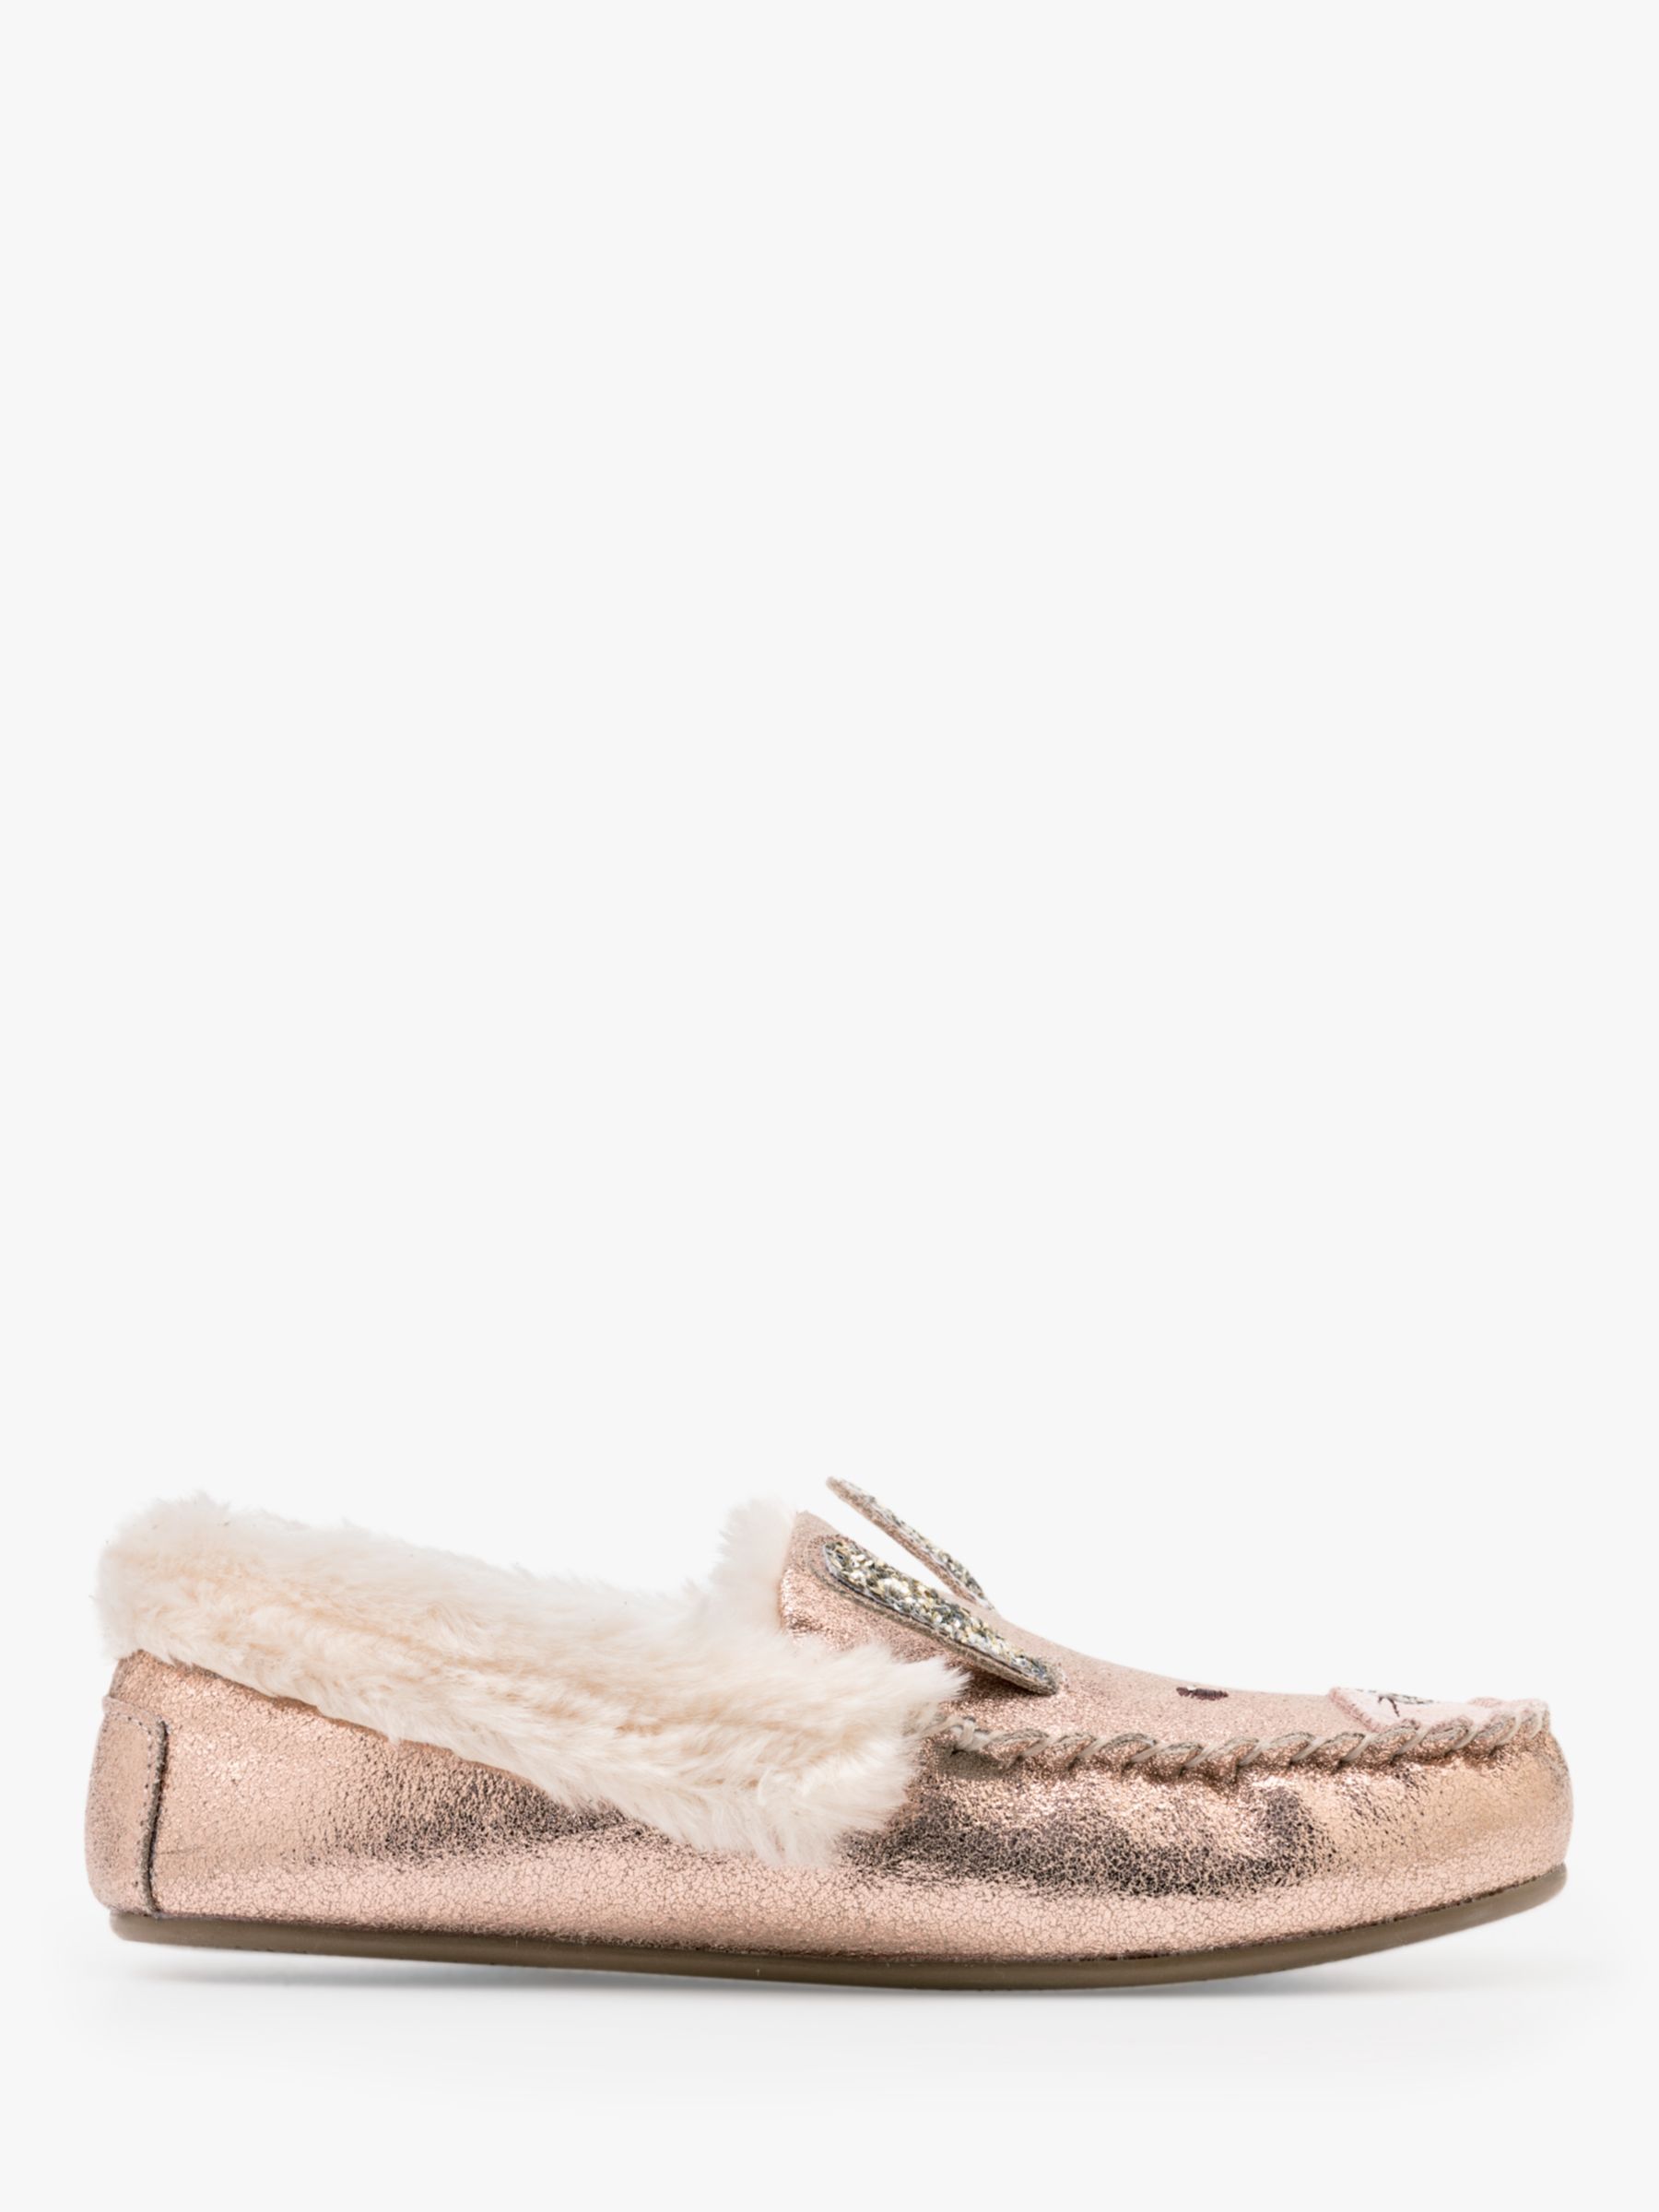 rose gold slippers